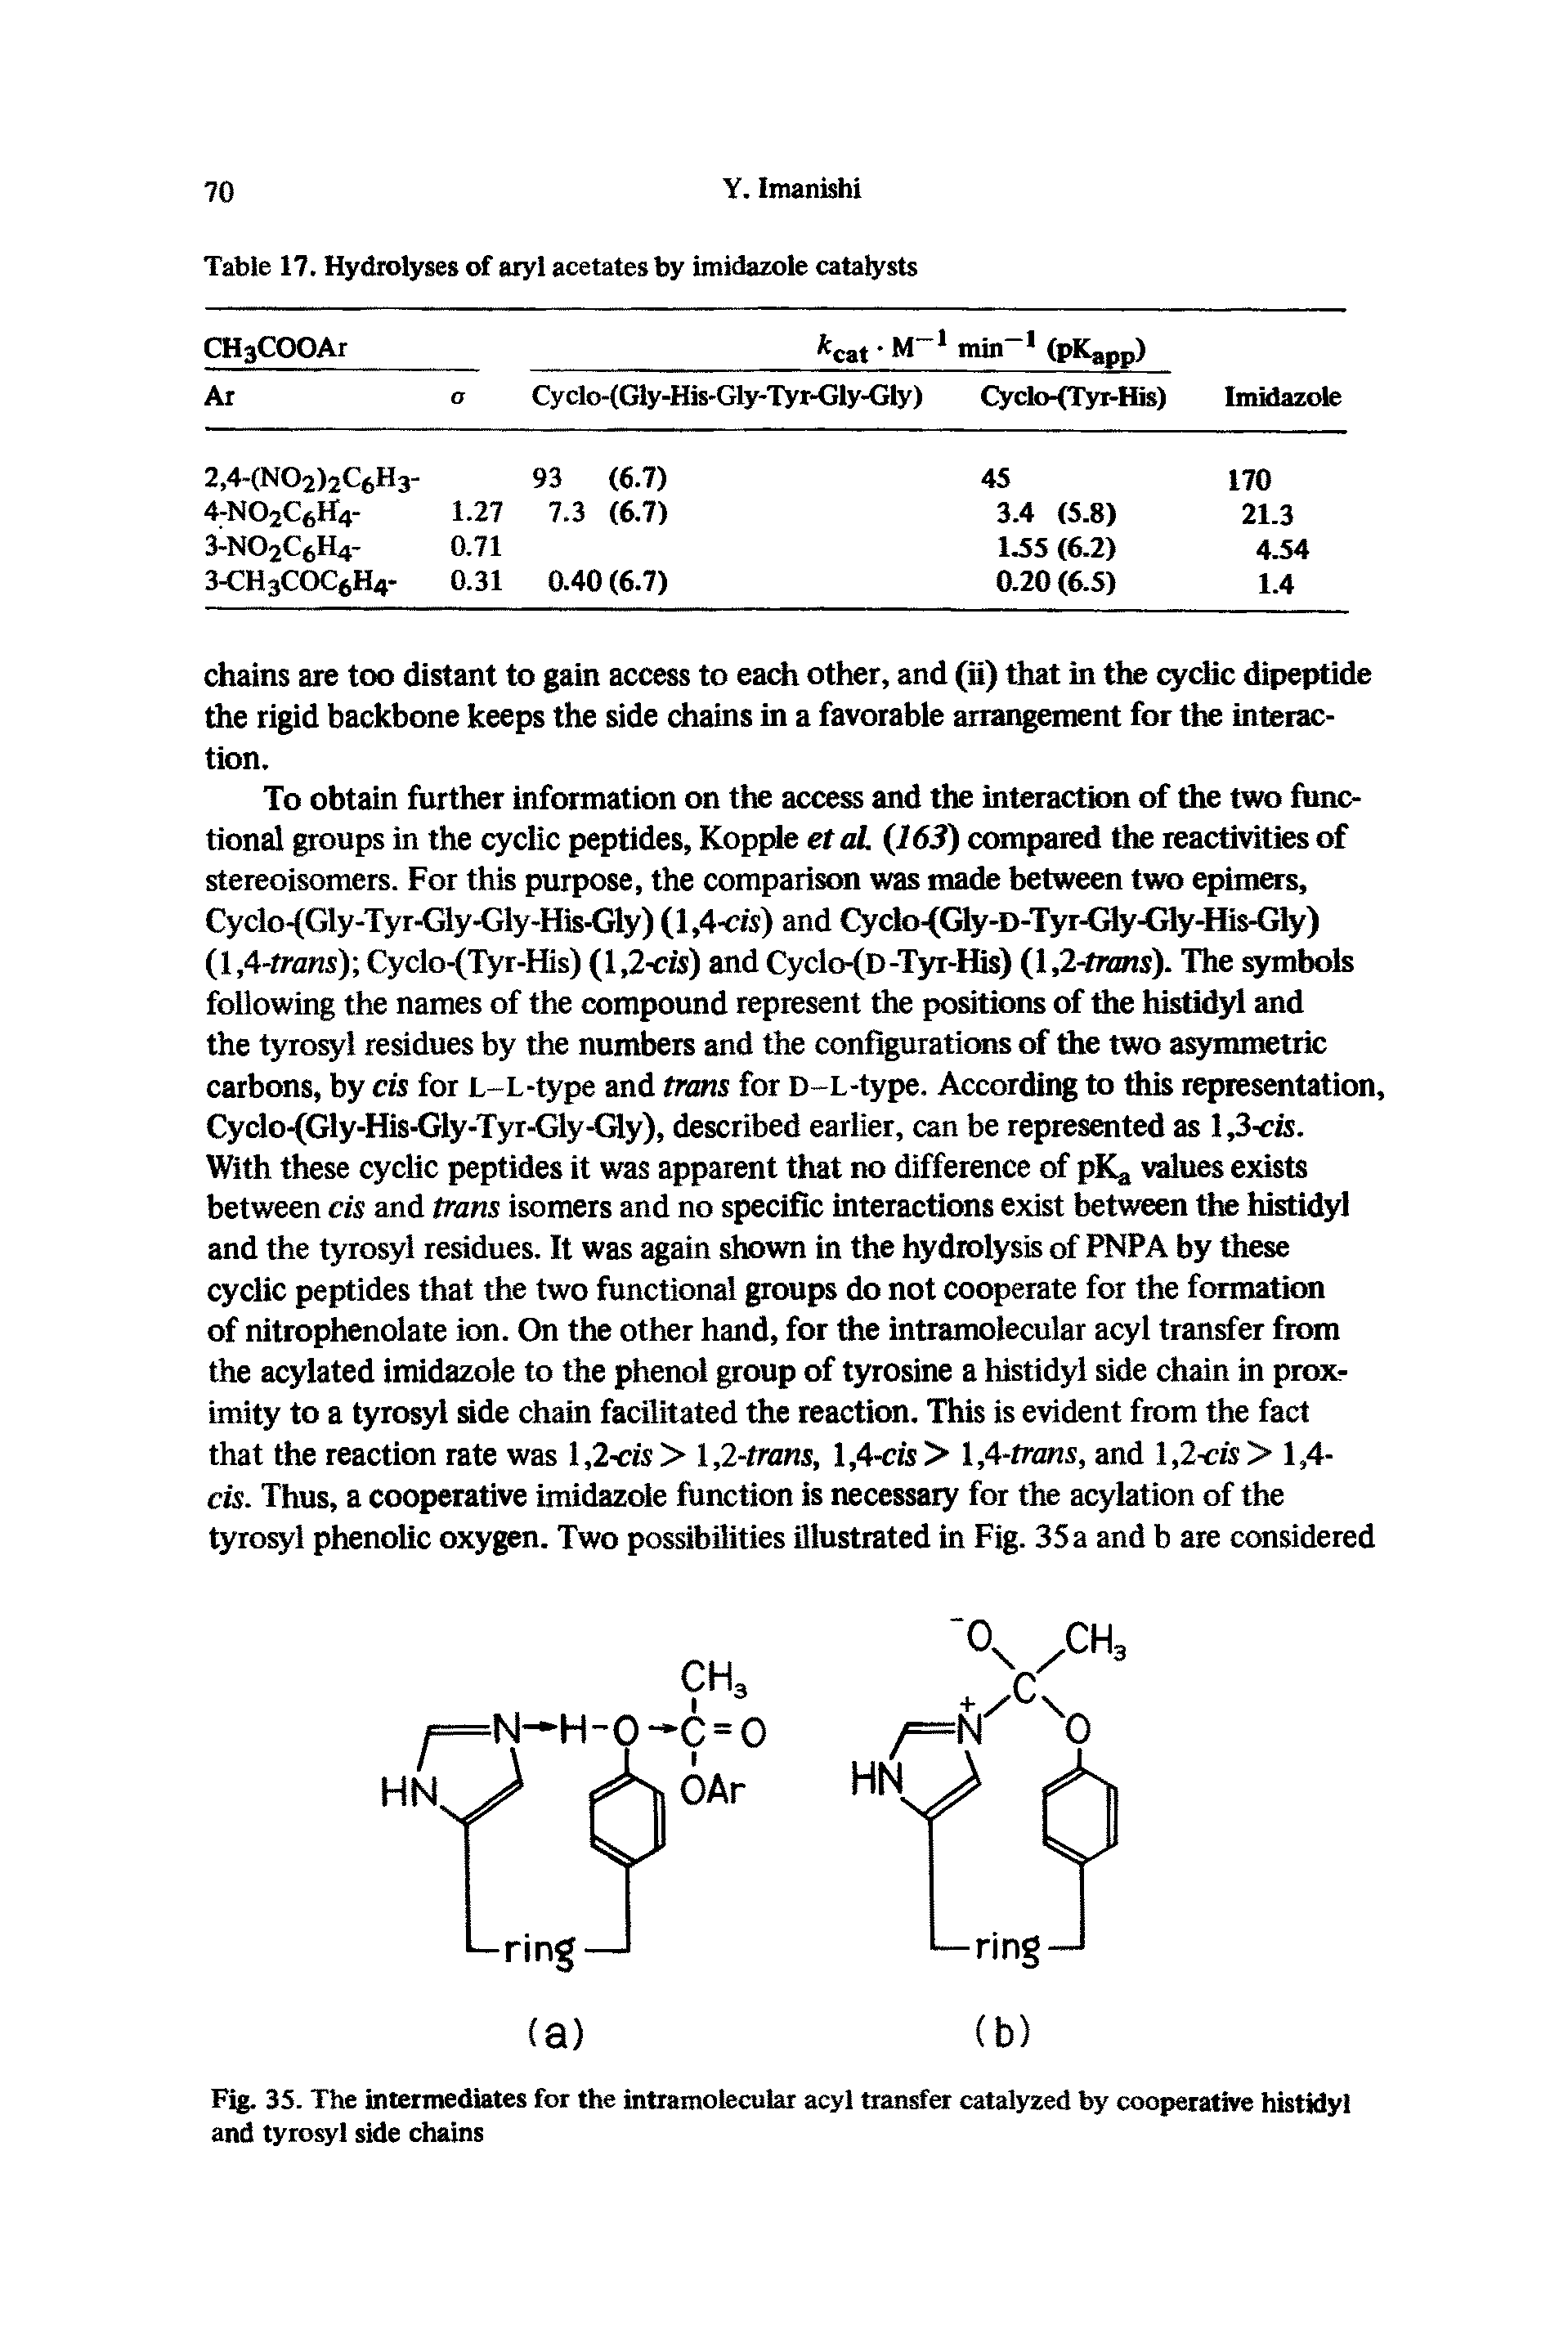 Table 17. Hydiolyses of aiyl acetates by imidazole catalysts...